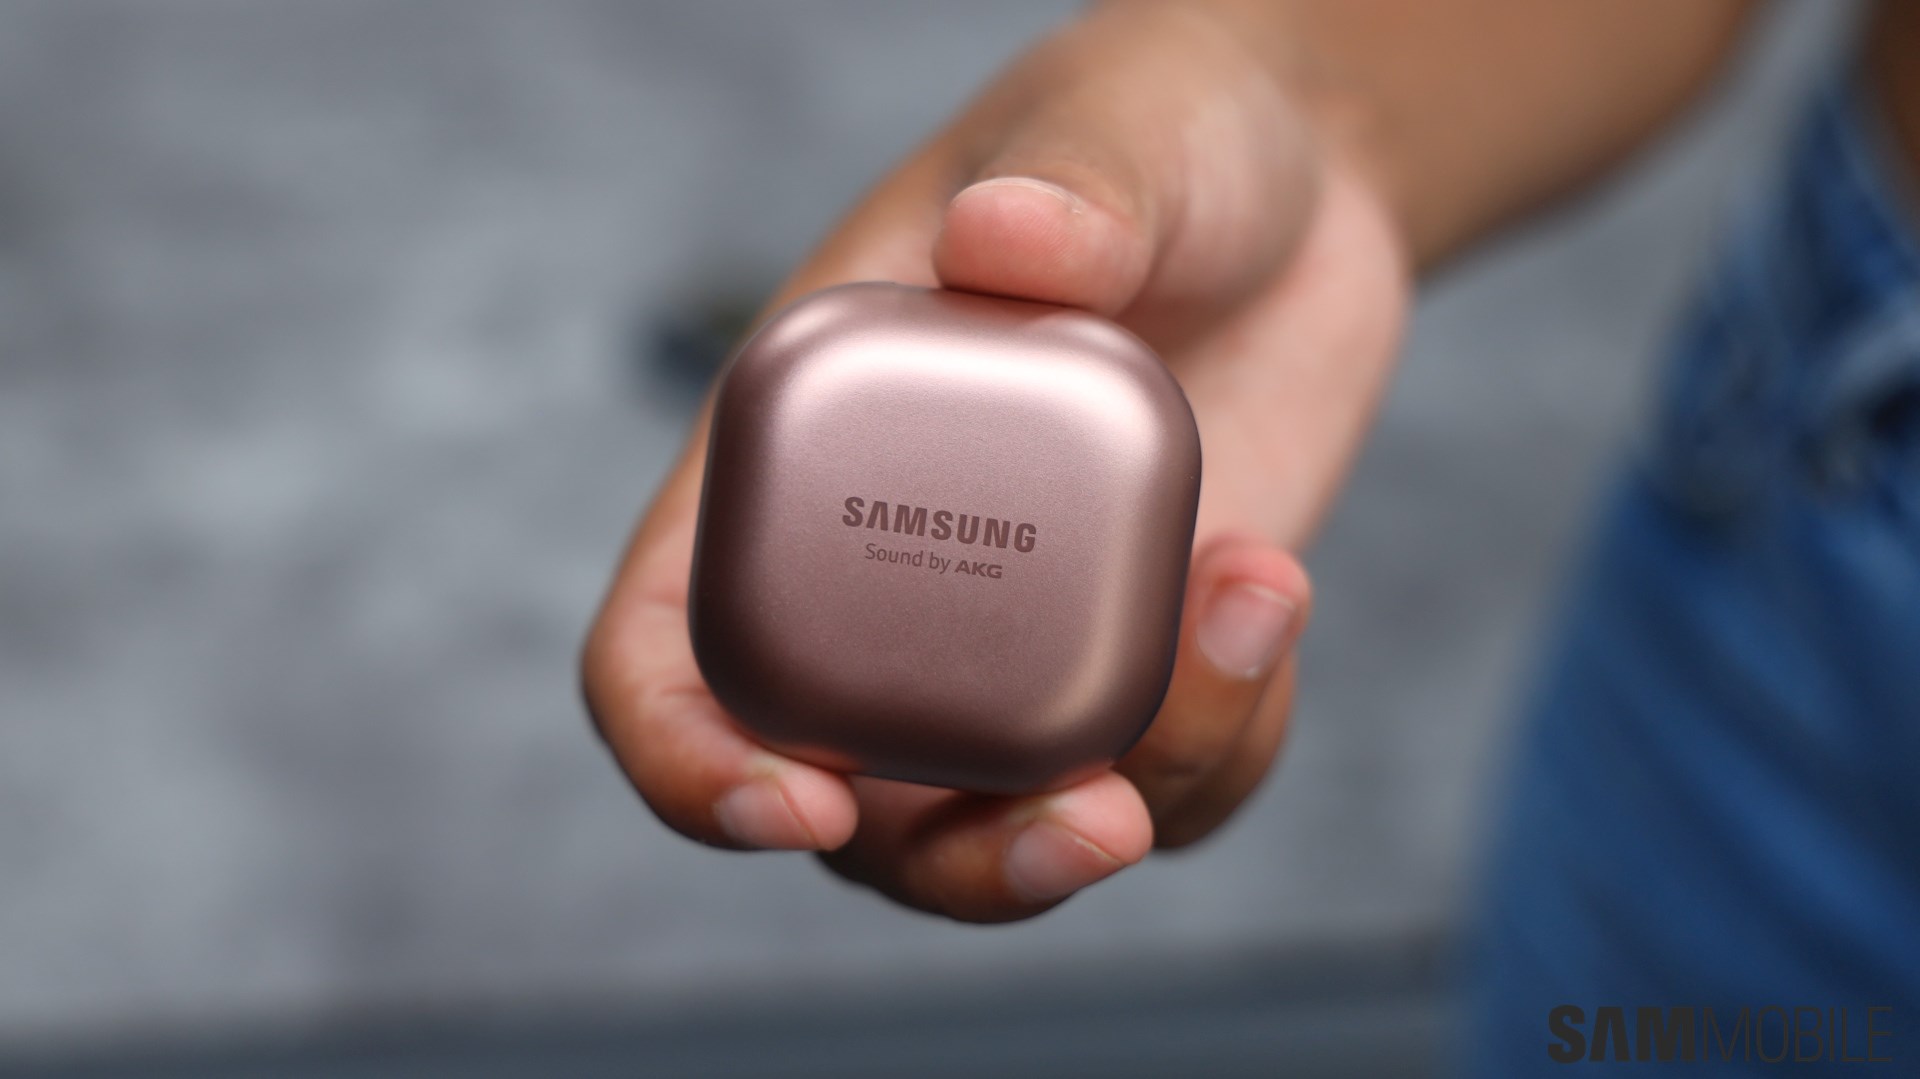 Samsung Galaxy Buds Pro get one step closer to launch - SamMobile